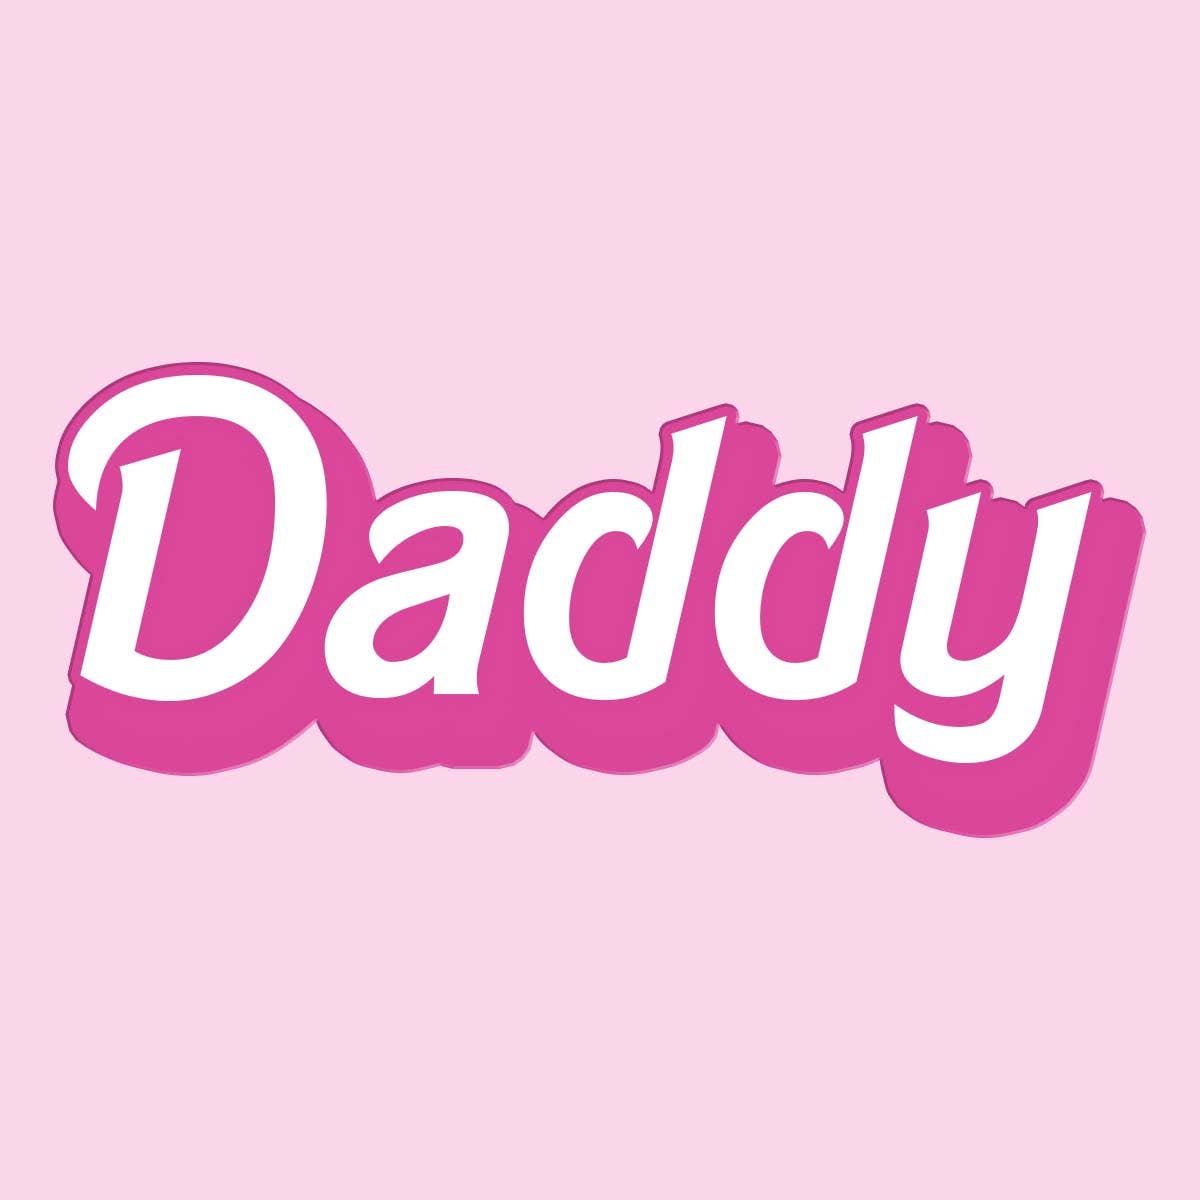 Daddy Sticker Decal, Father's Day Sticker Decal